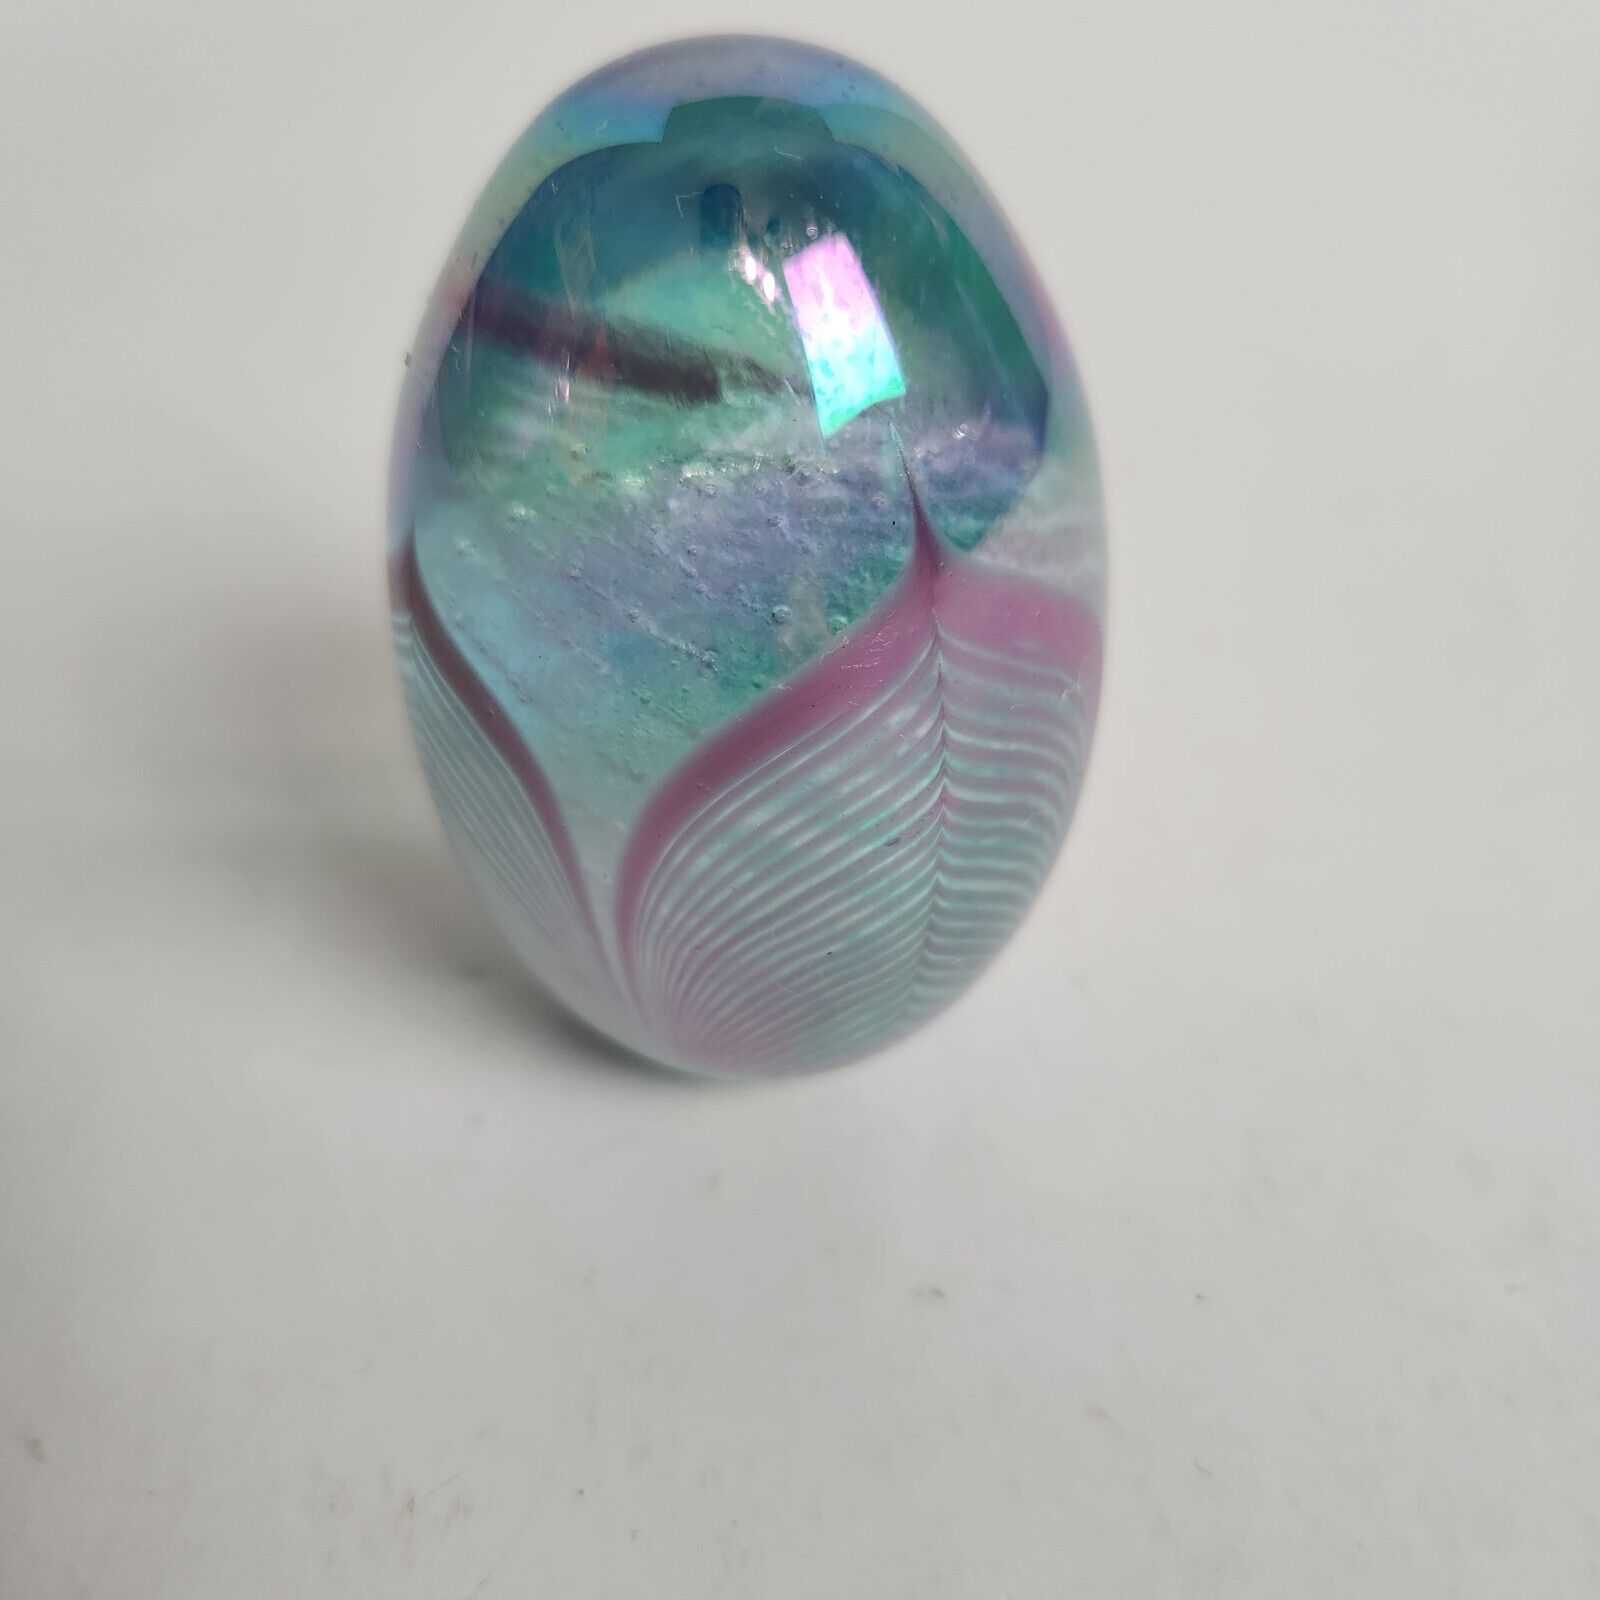 Vintage Egg Shaped Hand Blown Art Glass Paperweight Swirl Galaxy Looking Unique